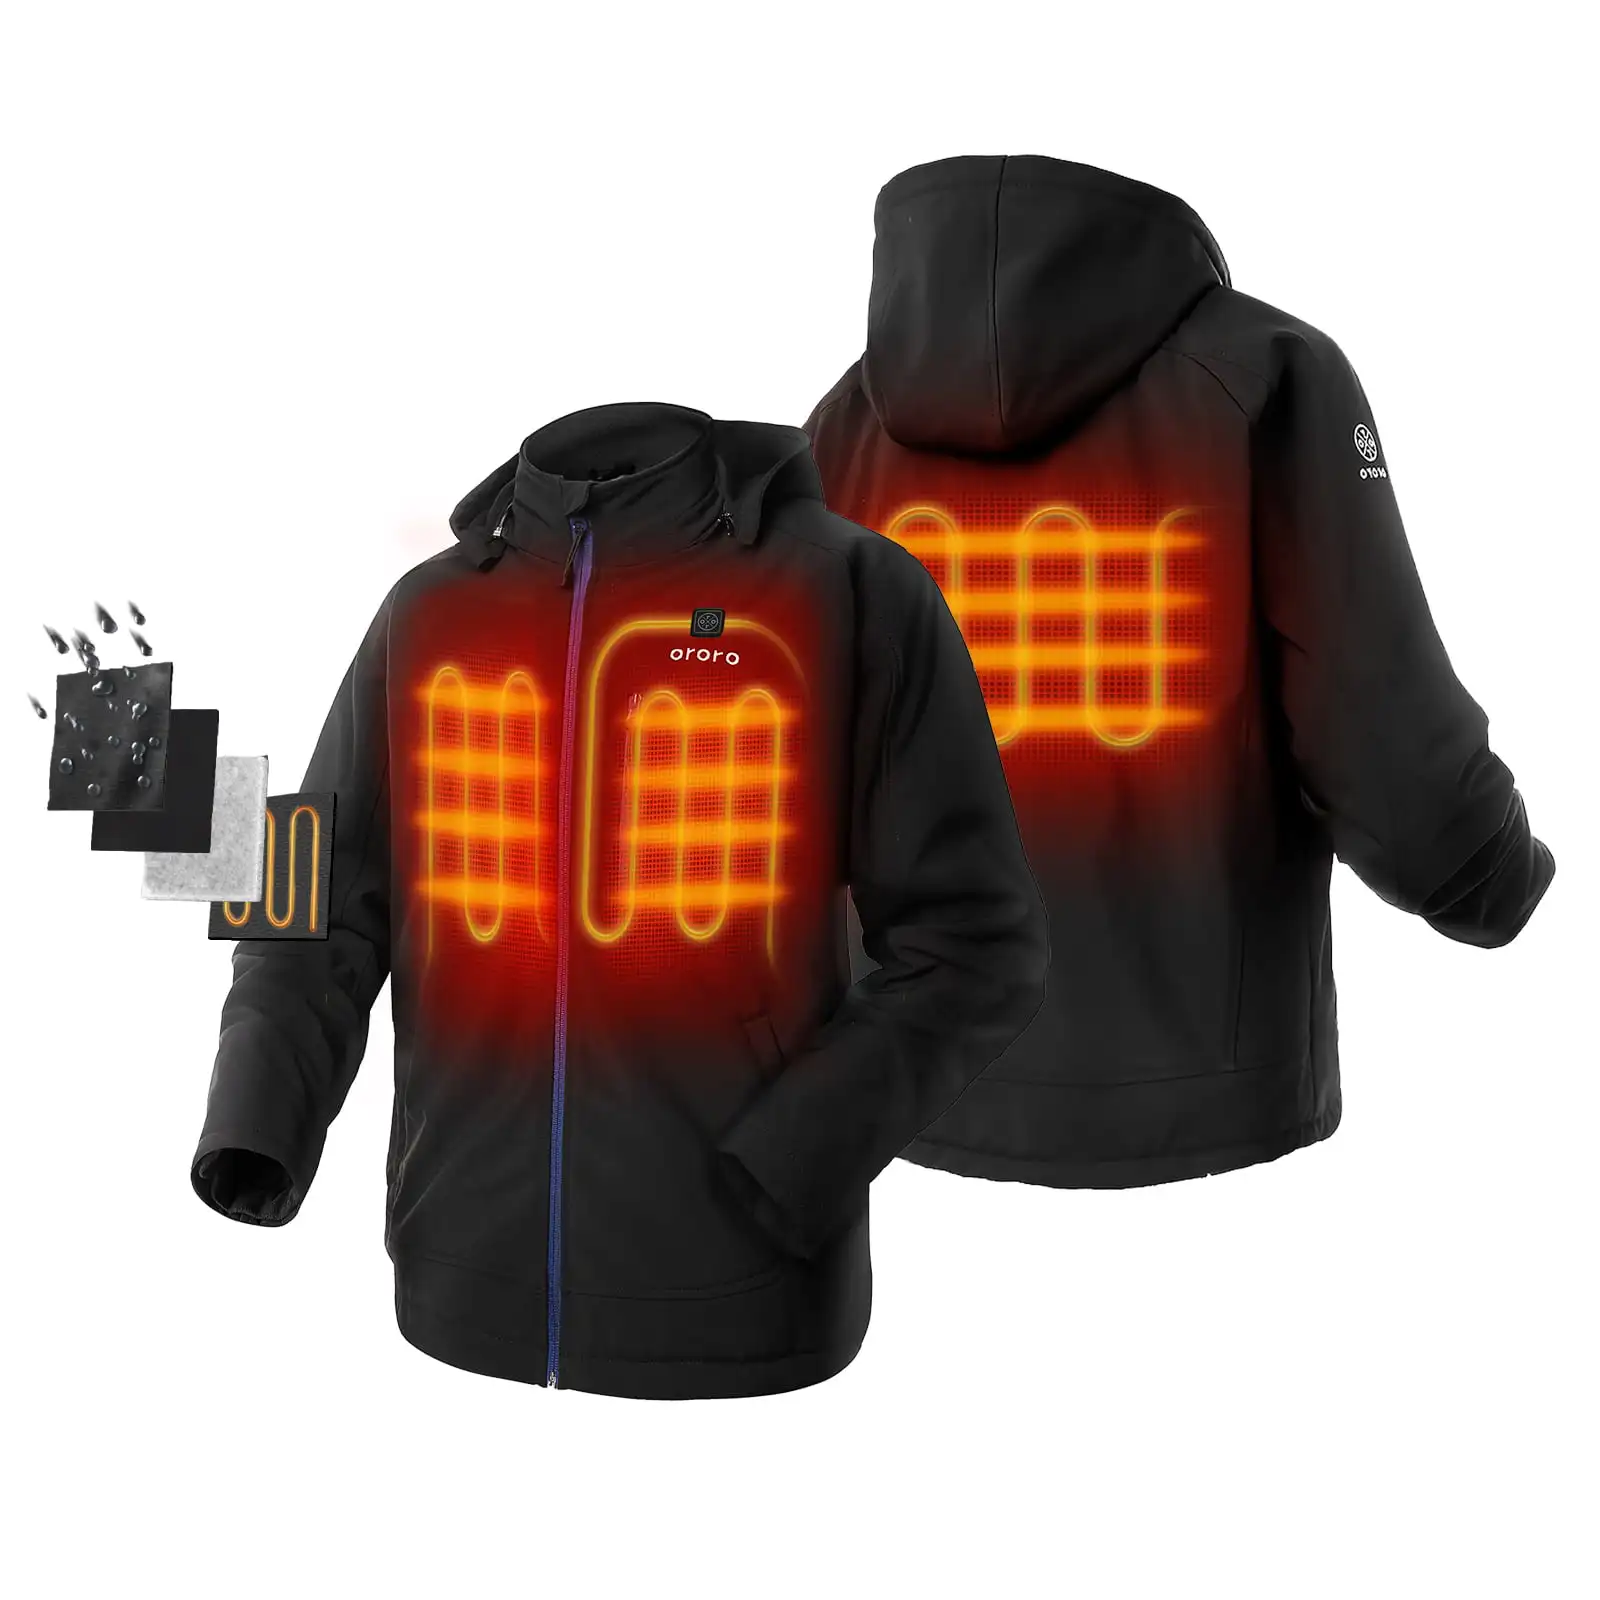 Men's Heated Jacket Kit With Detachable Hood and Battery Pack